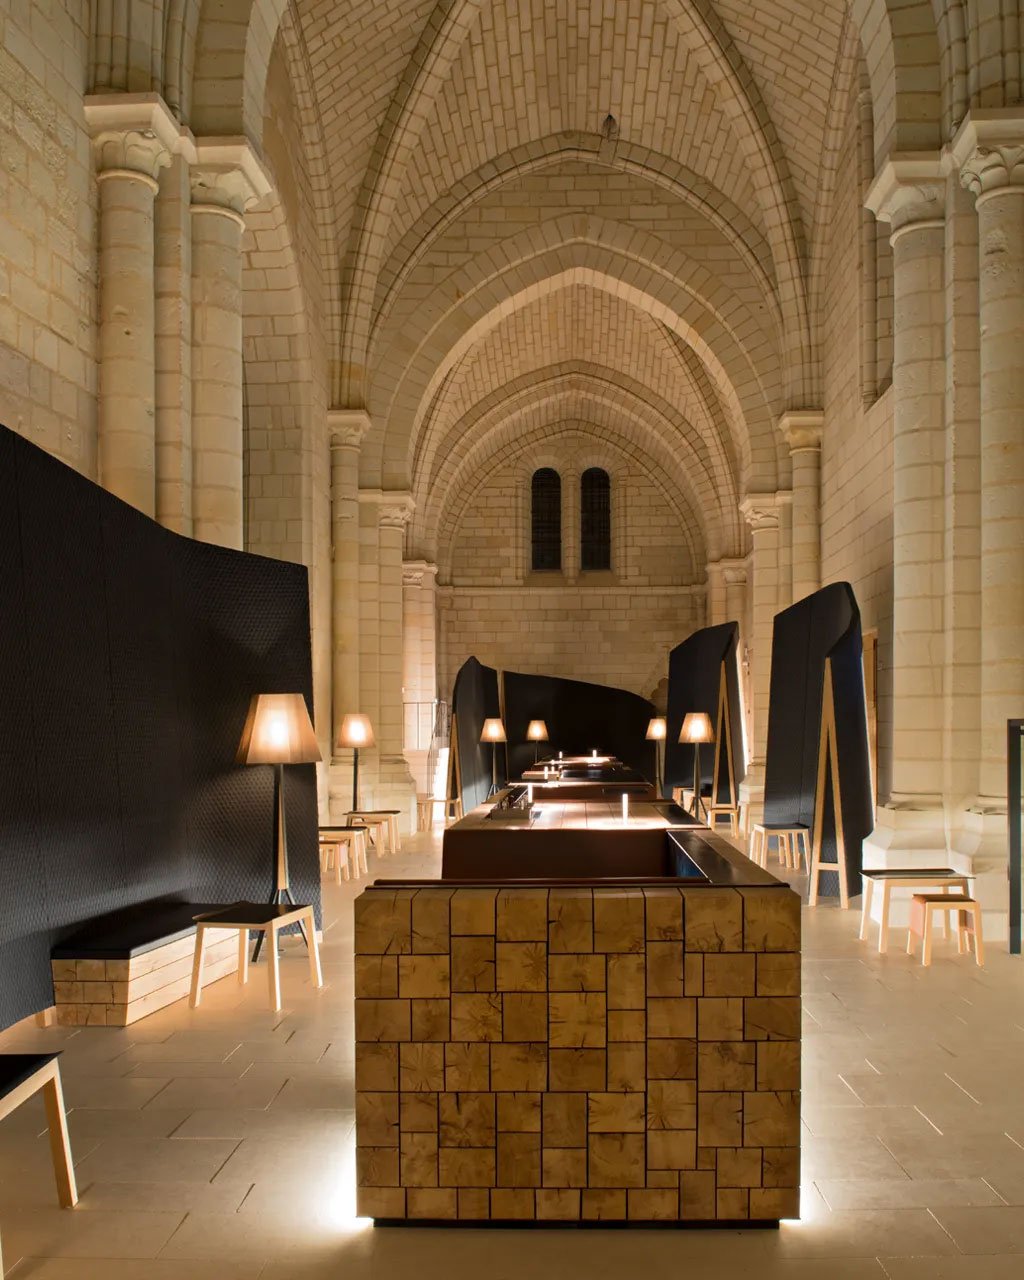 A monastery in the Loire Valley has been transformed into a hotel and restaurant — Nicolas Mathéus